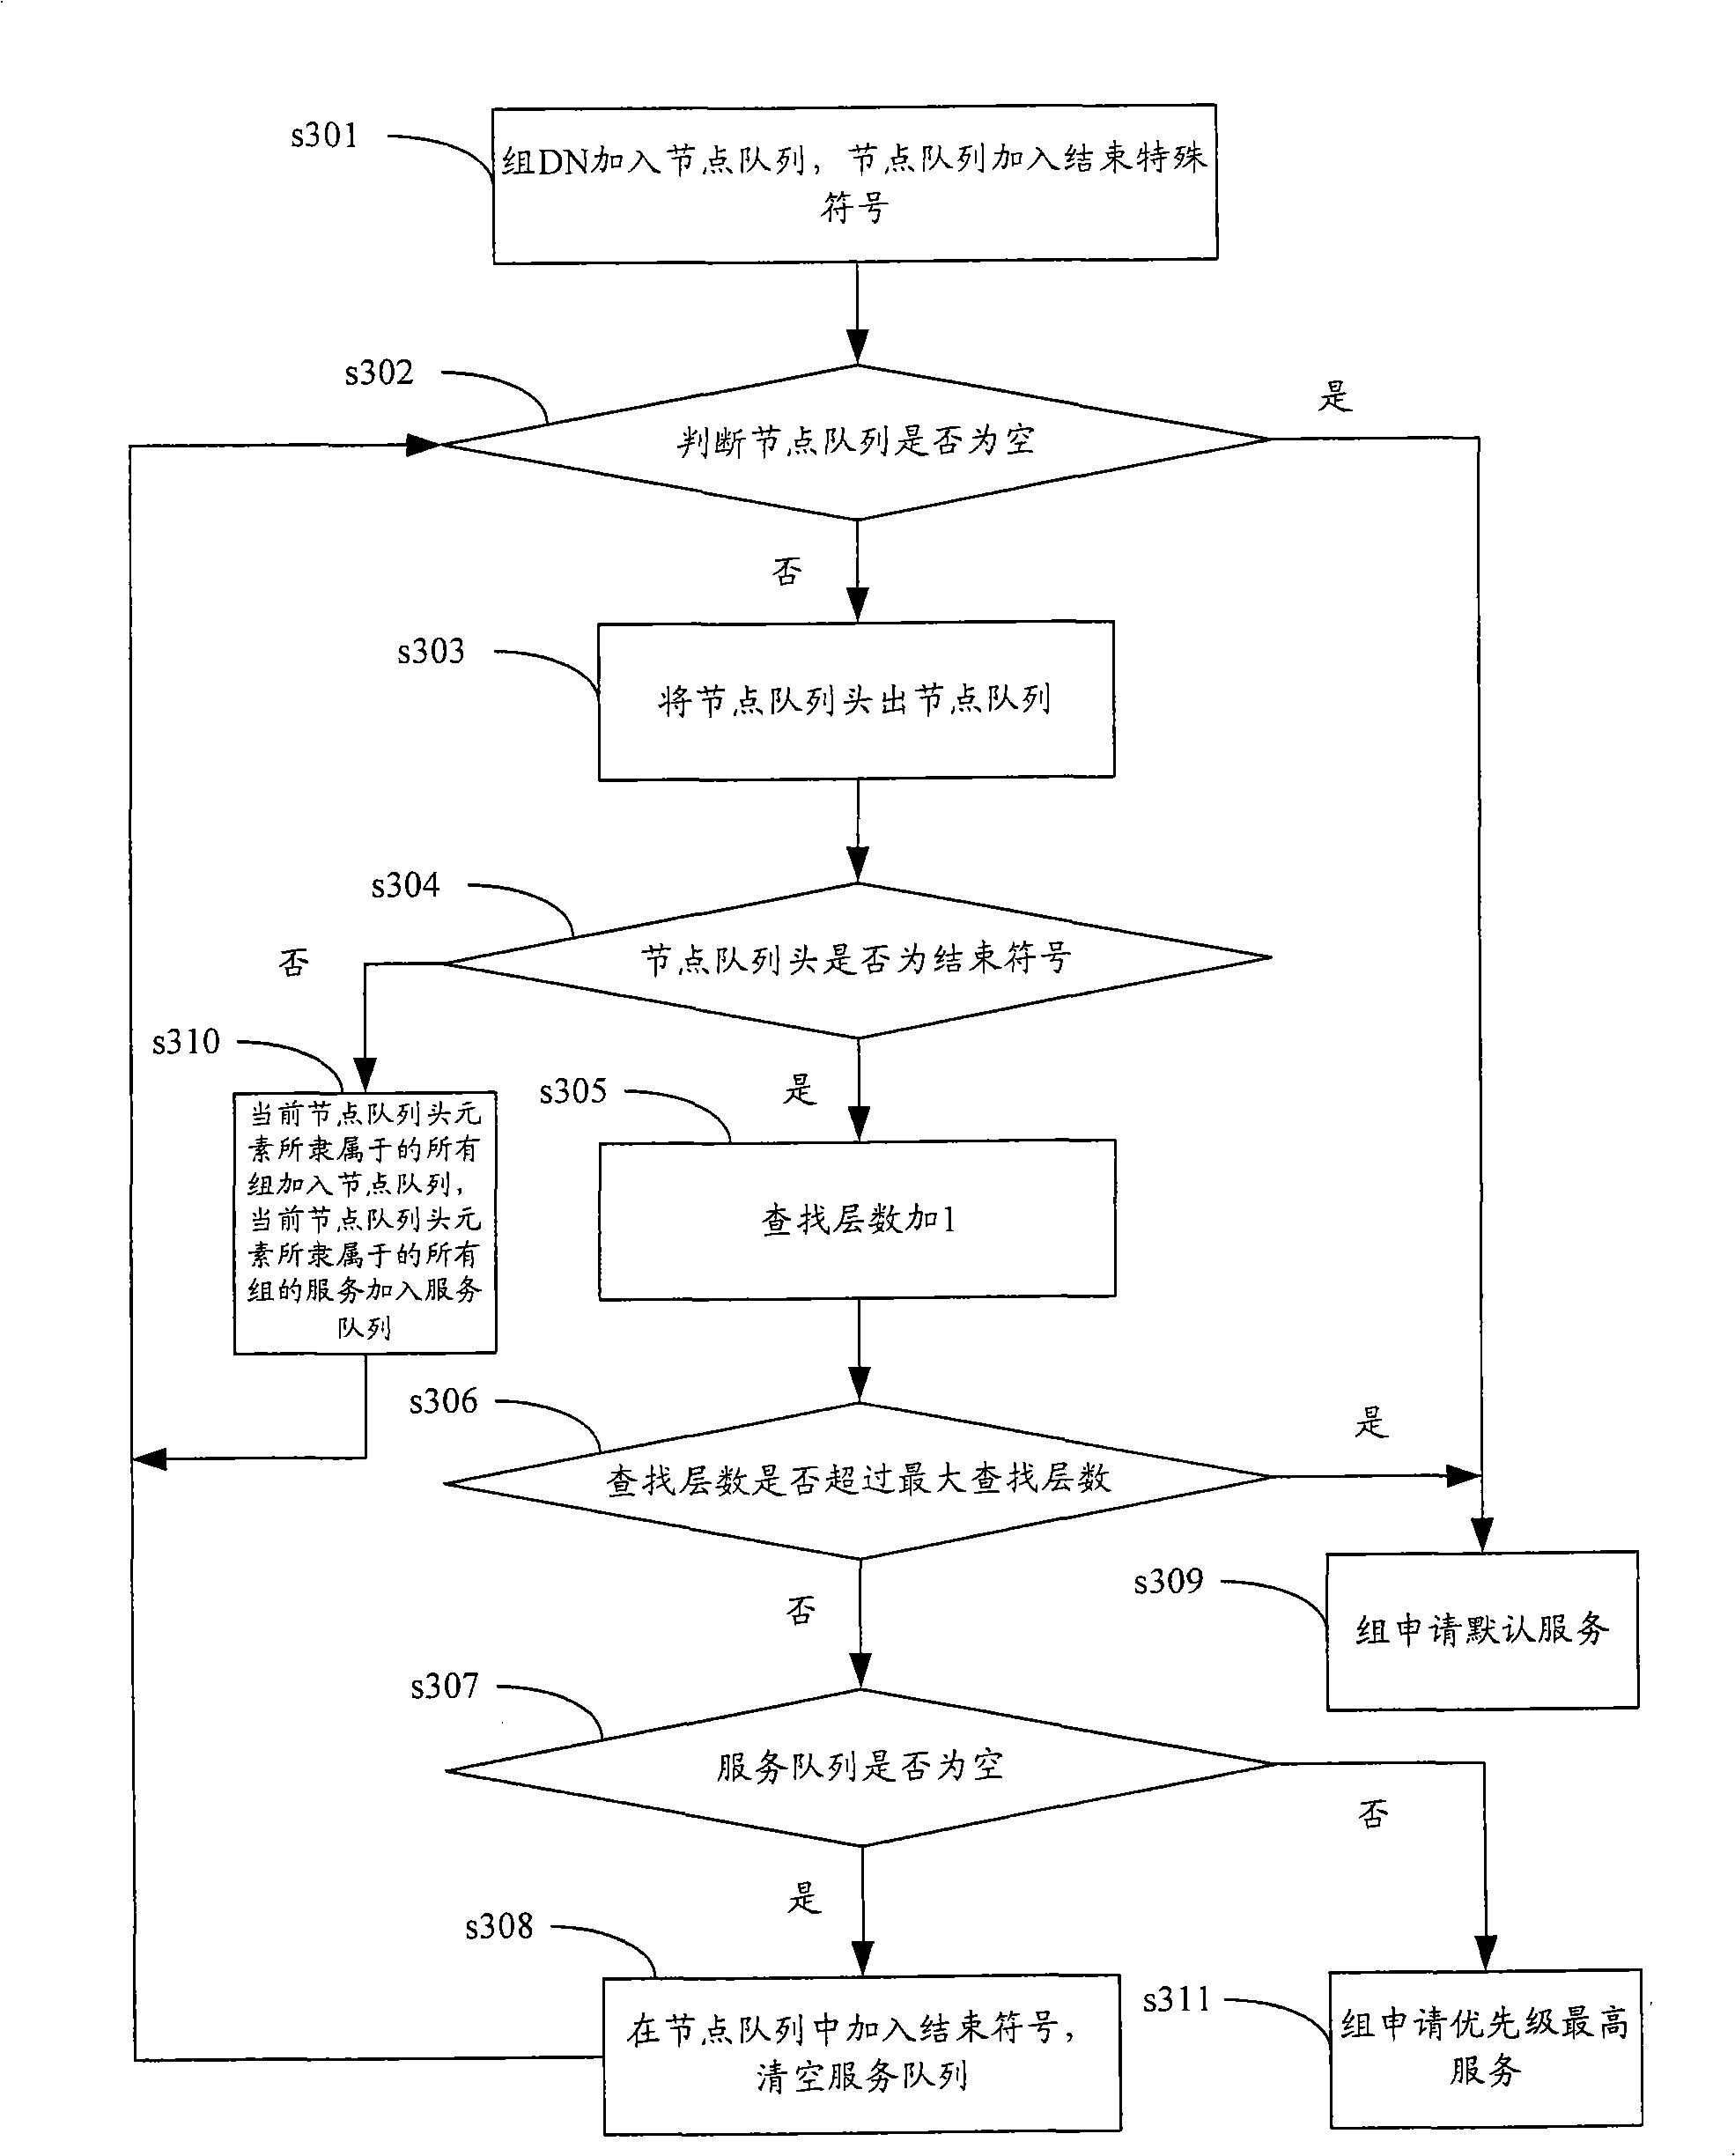 Method and apparatus for distributing user terminal service